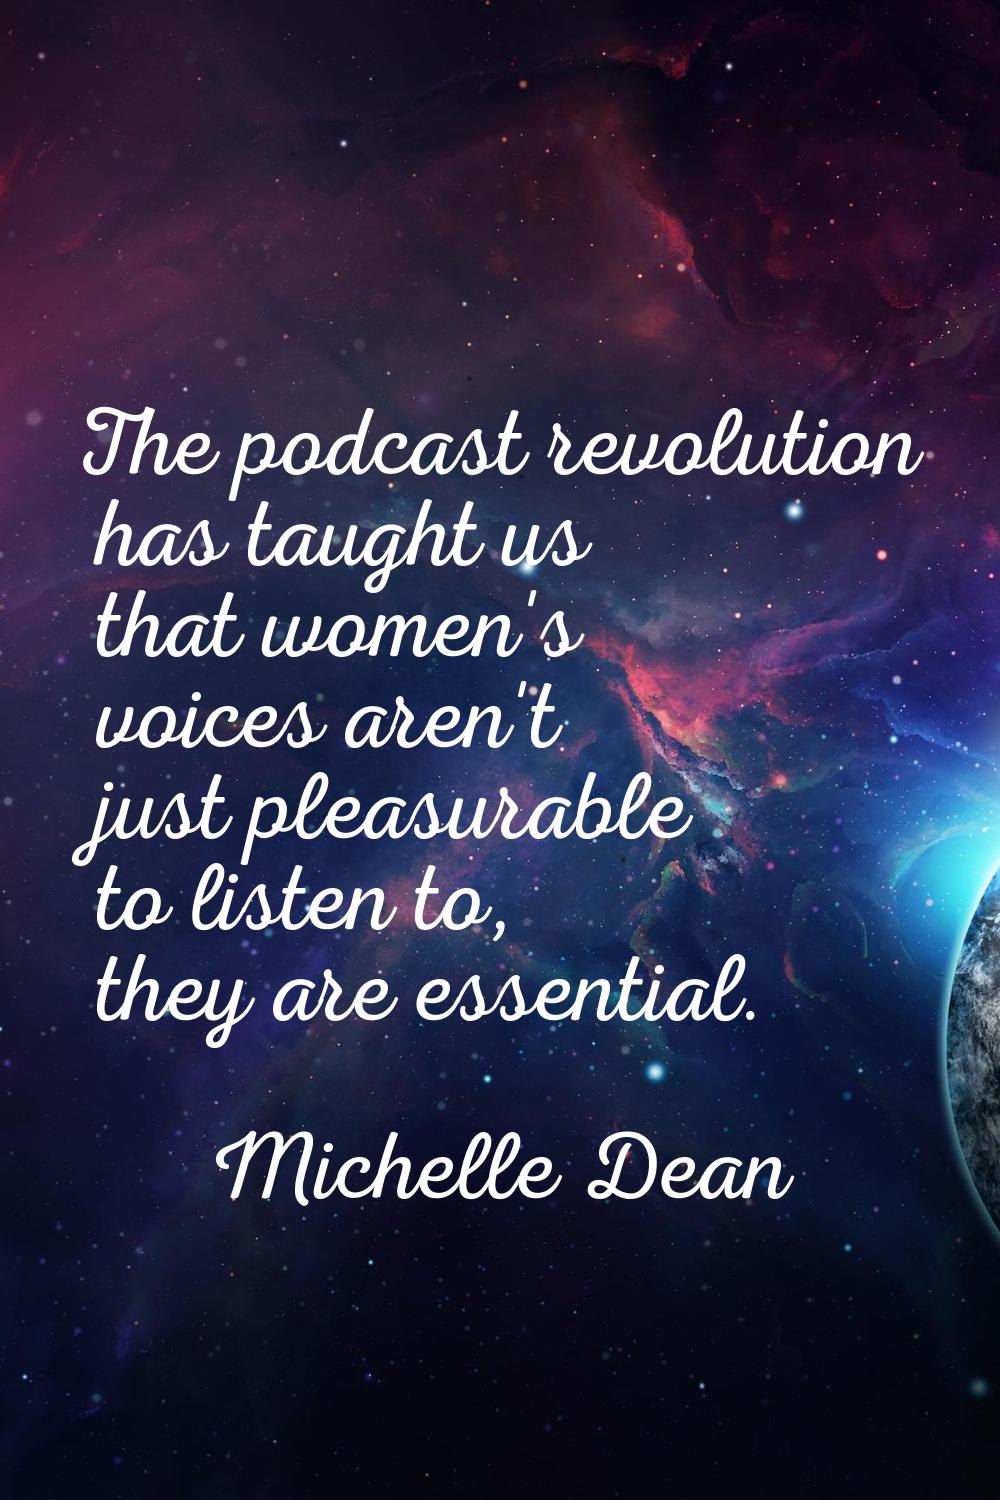 The podcast revolution has taught us that women's voices aren't just pleasurable to listen to, they